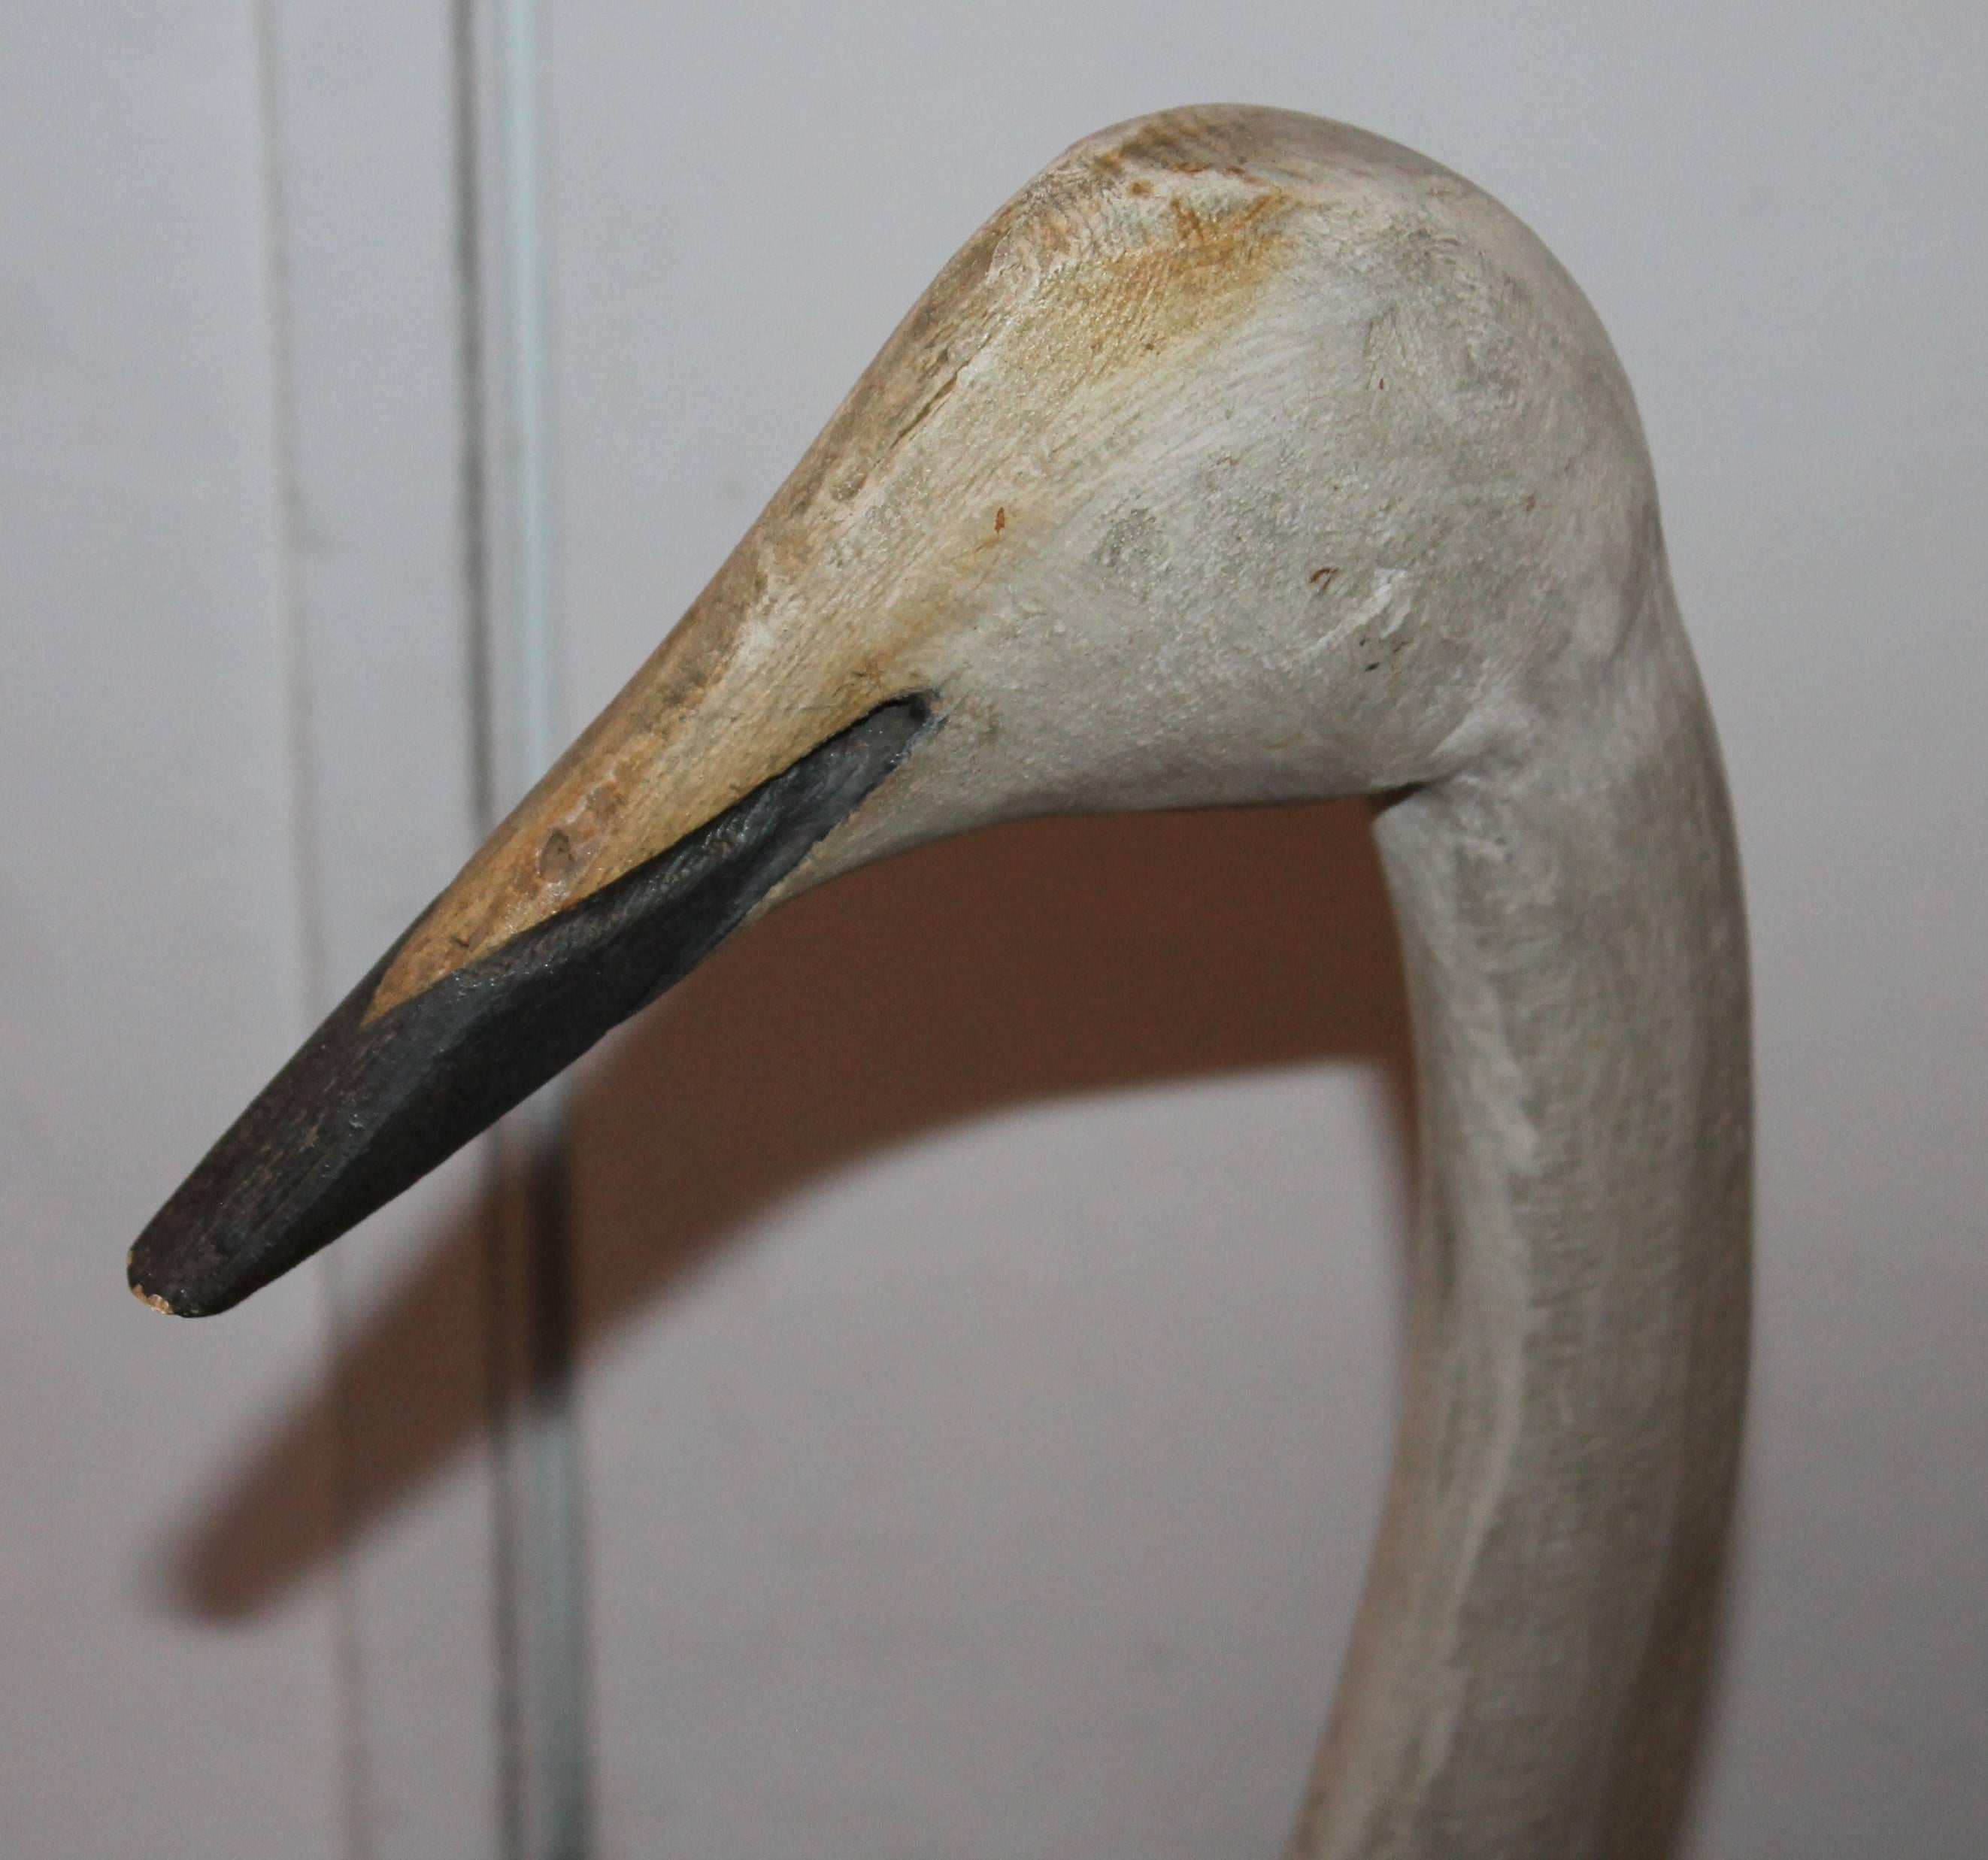 Country 1930s Signed and Dated Hand-Carved Goose Decoy from Diamond, Missouri